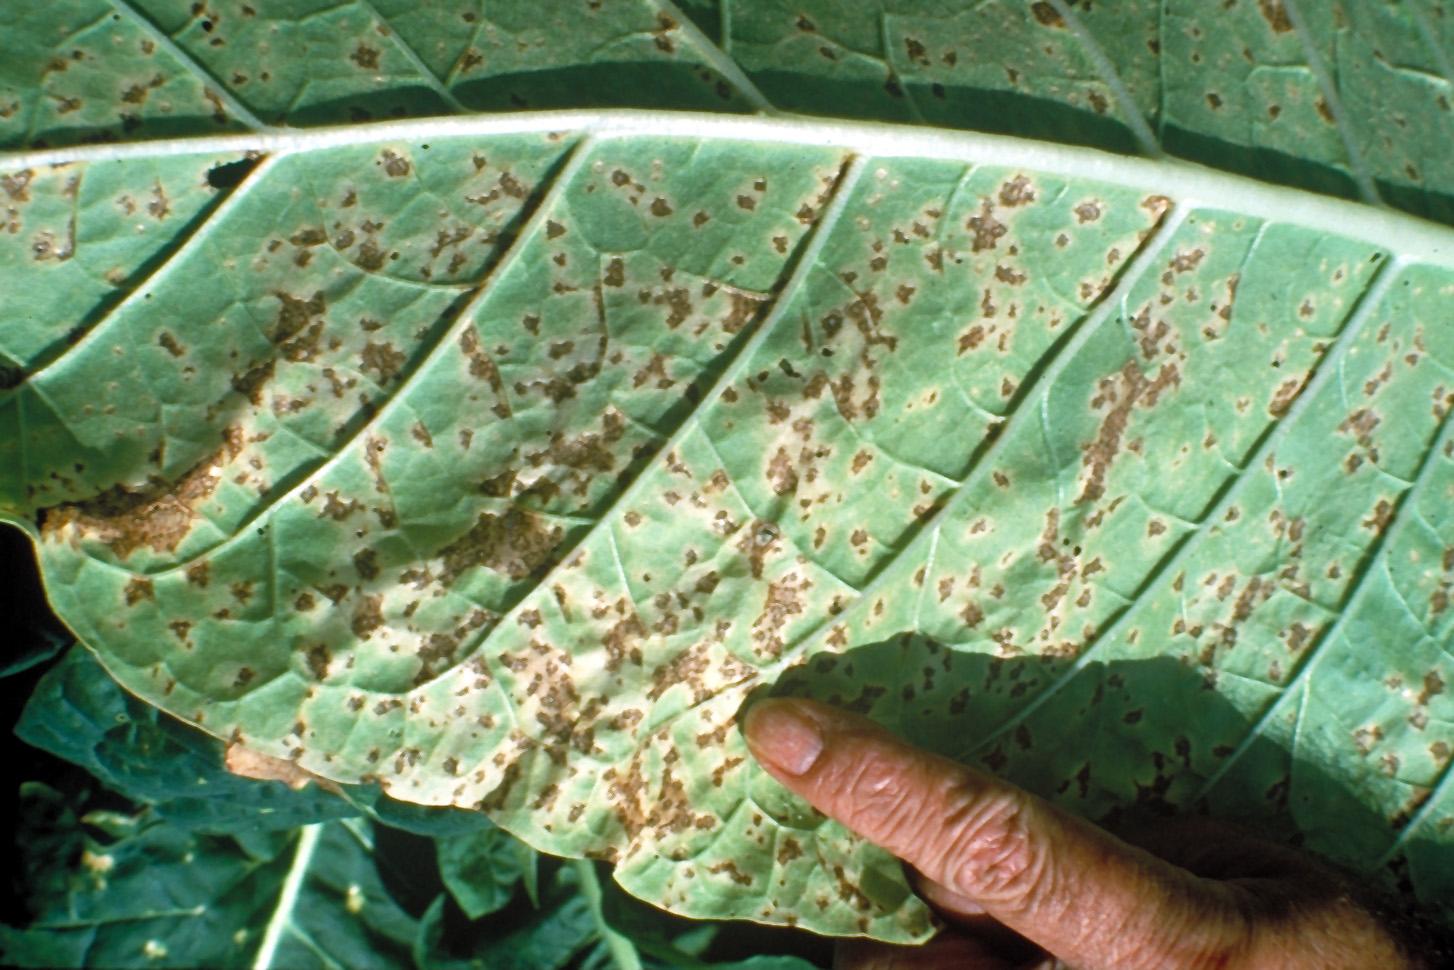 The underside of a burley tobacco leaf showing angular leaf spot lesions. (Photo: Joe Smiley, UK)